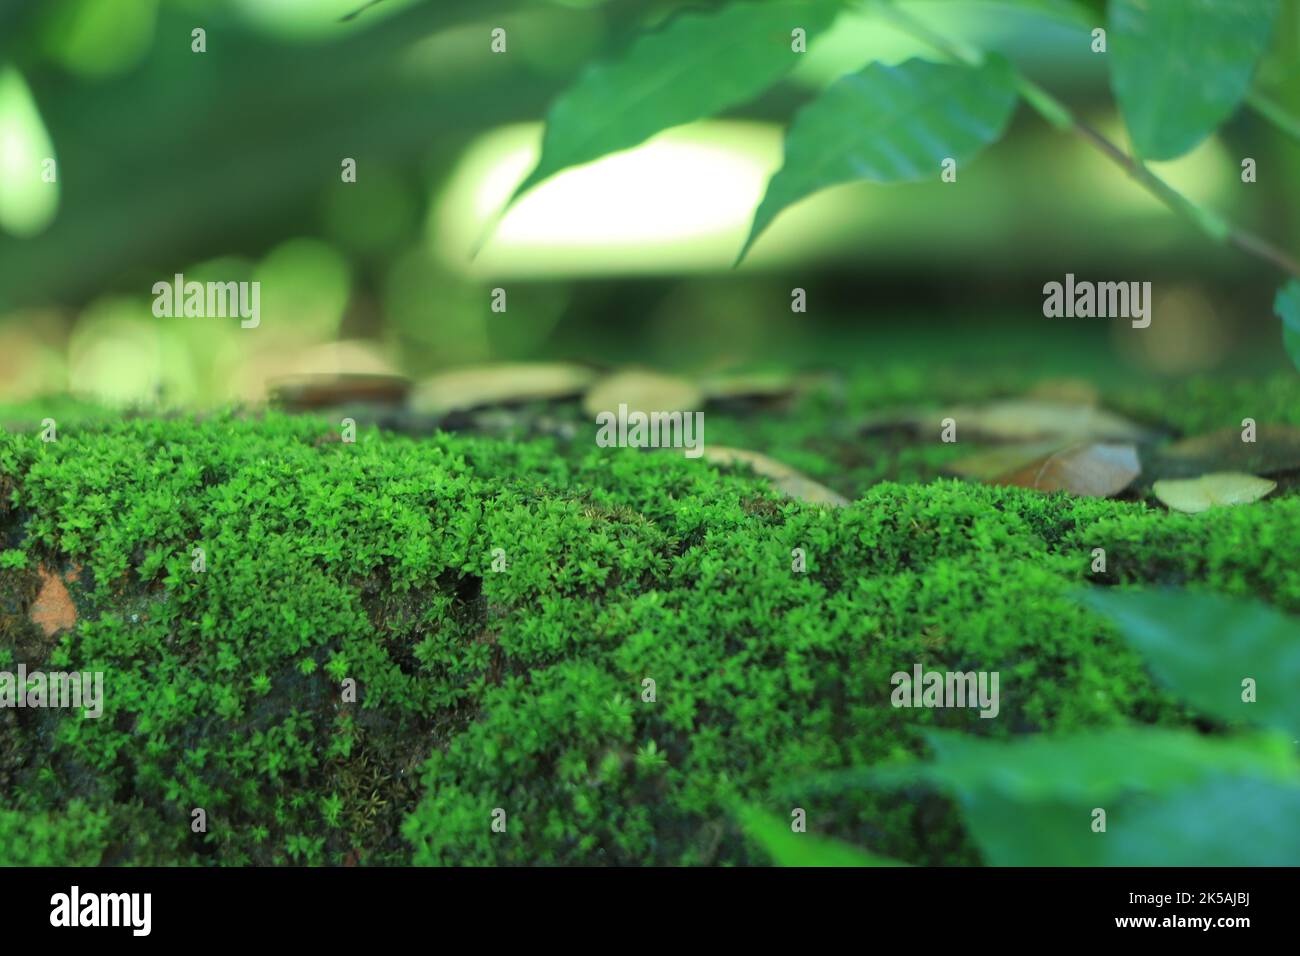 Texture of growing moss on wall surface Stock Photo